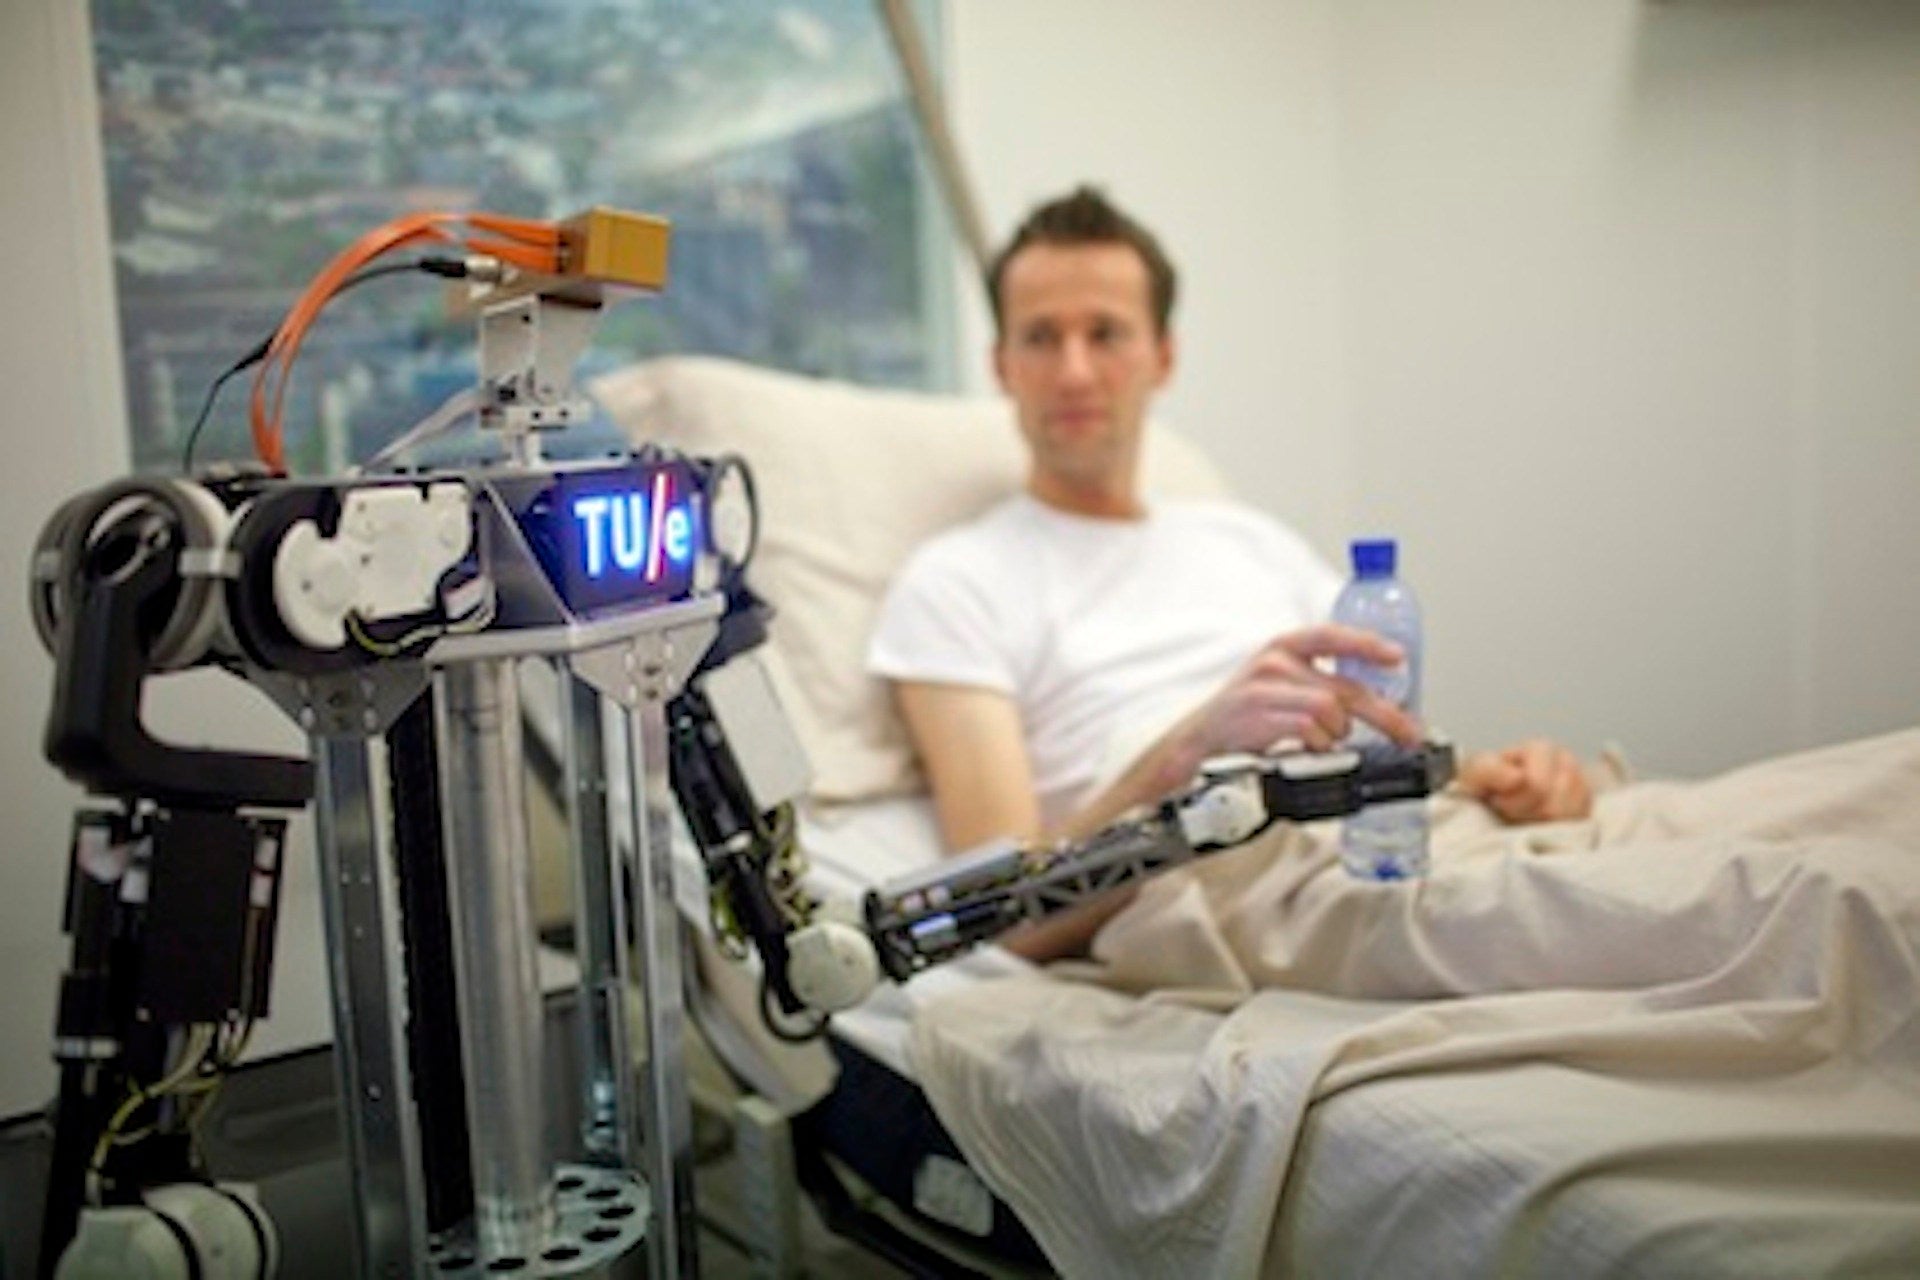 The RoboEarth 'internet' will be trialled with bots helping out in hospitals.